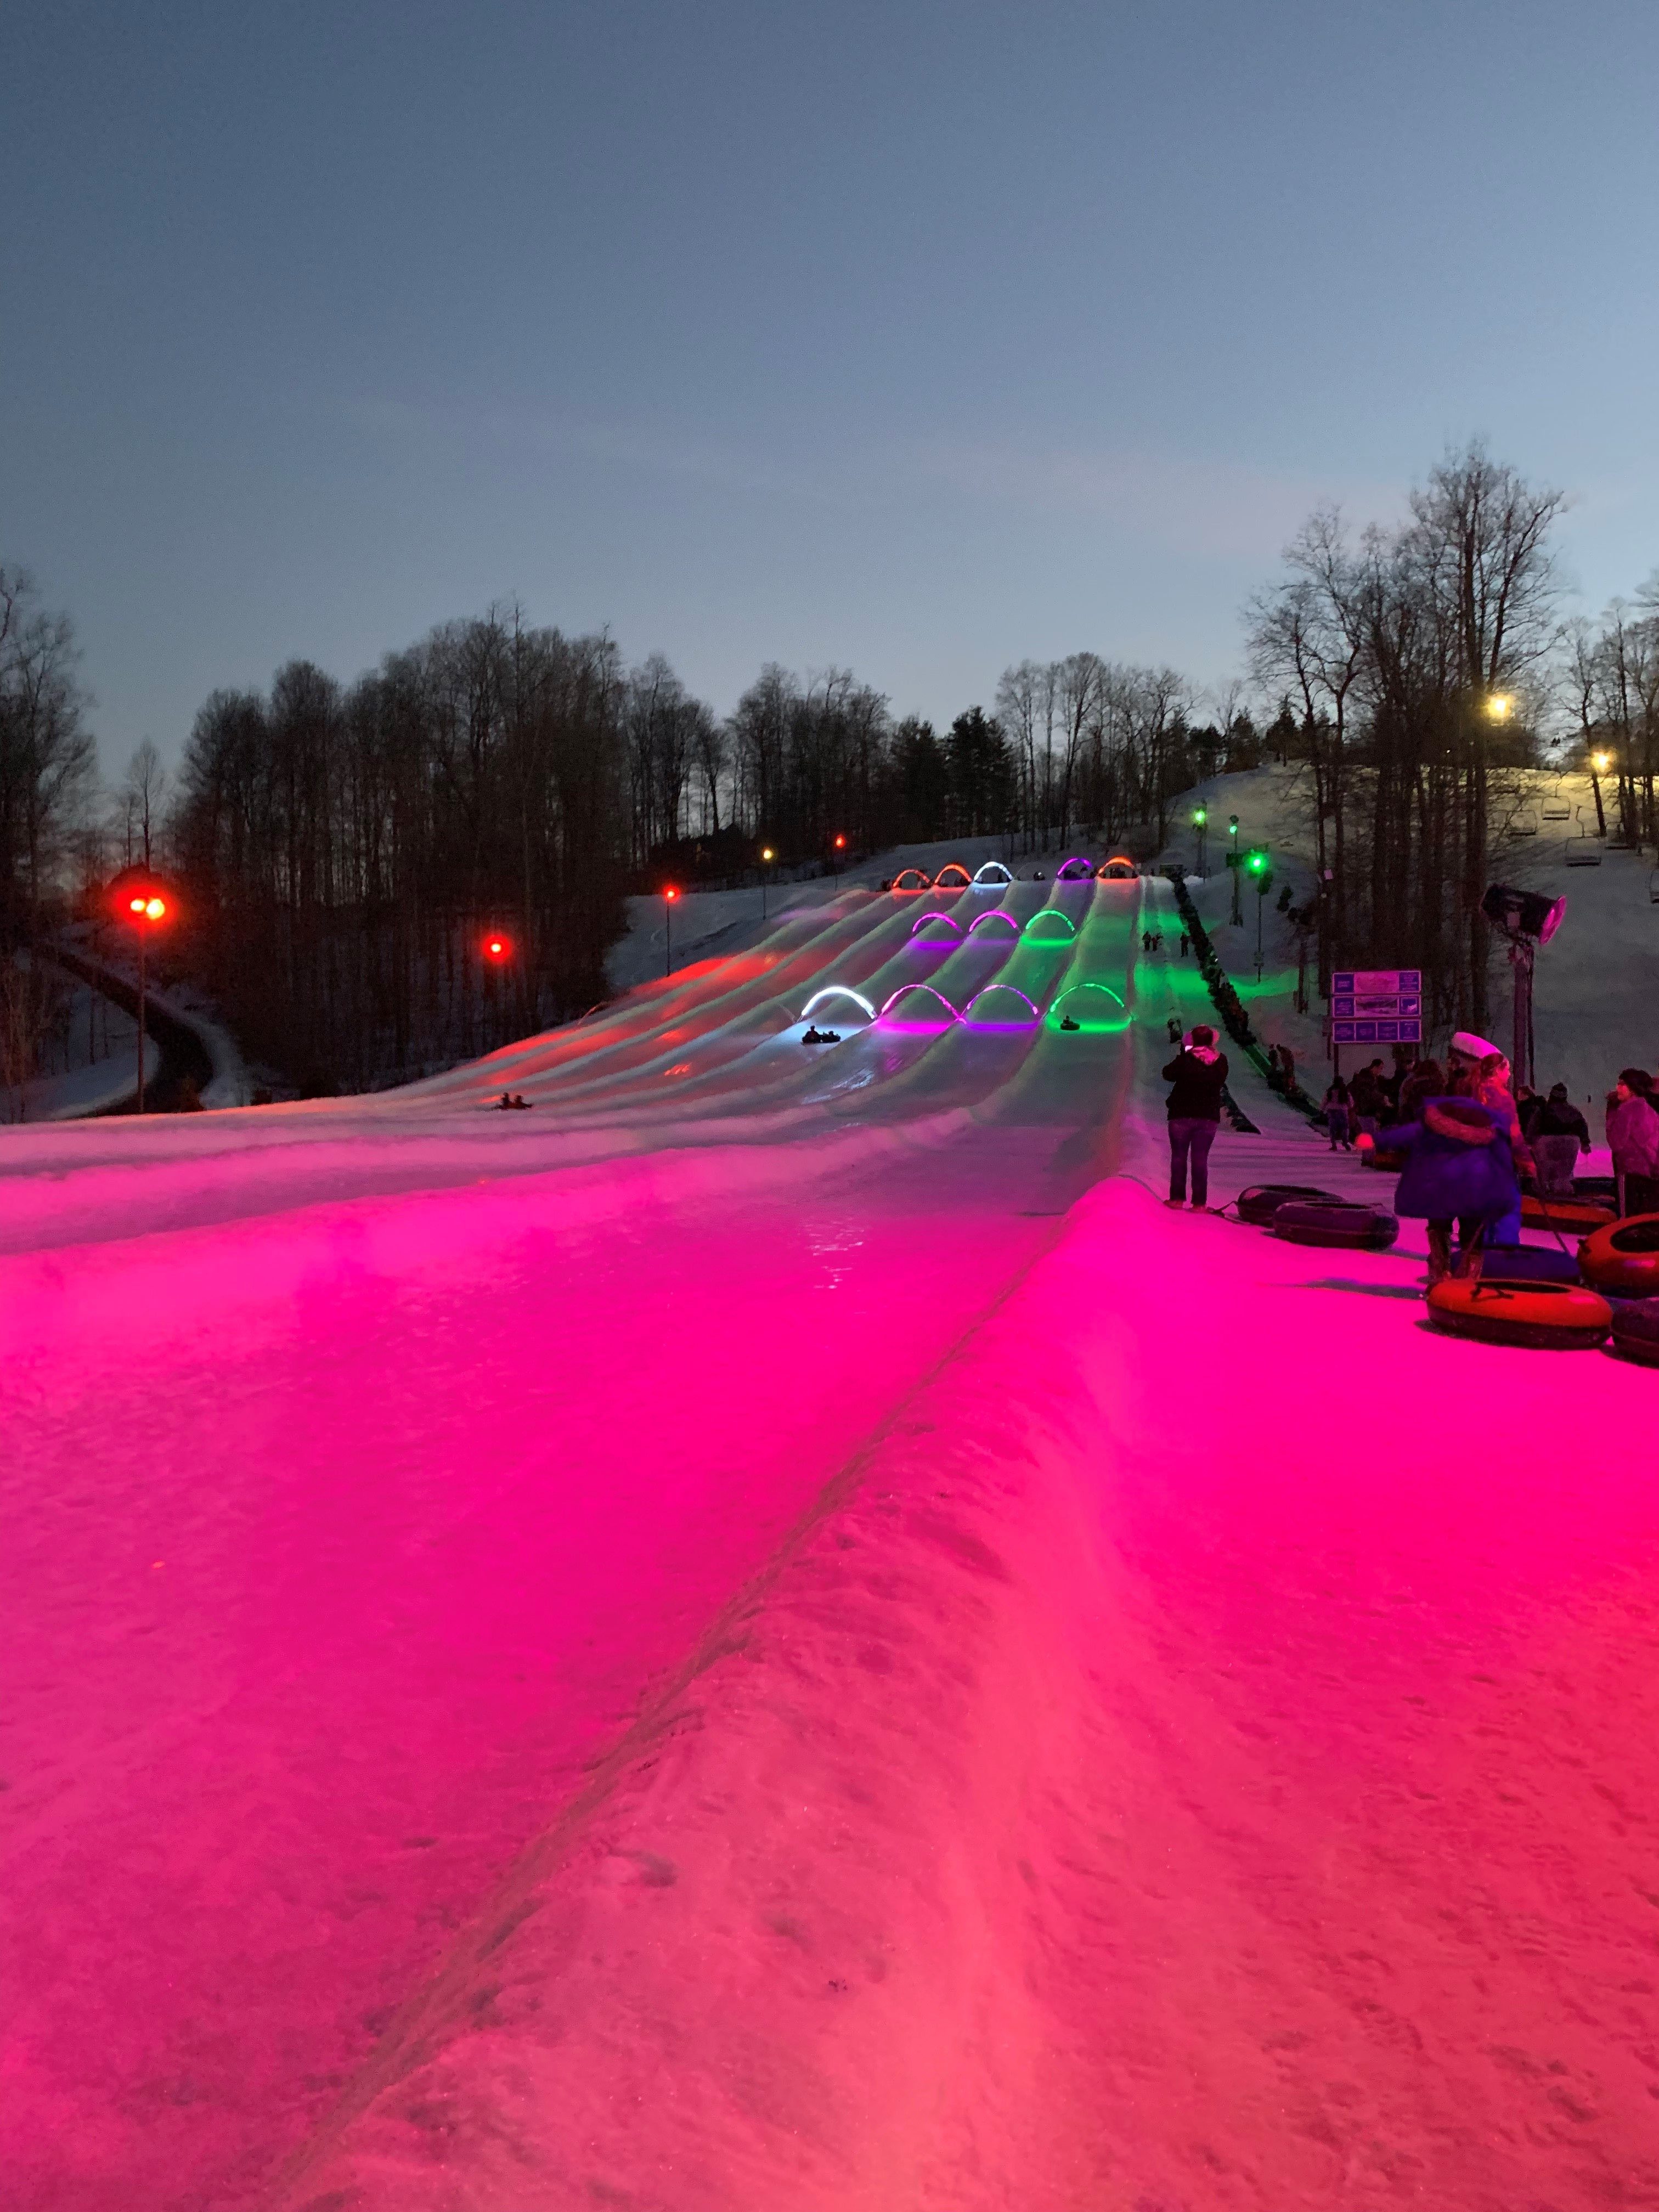 Glow Tubing at Snow Trails is Screaming Good Fun - Destination Mansfield Glow Tubing In Mansfield Ohio